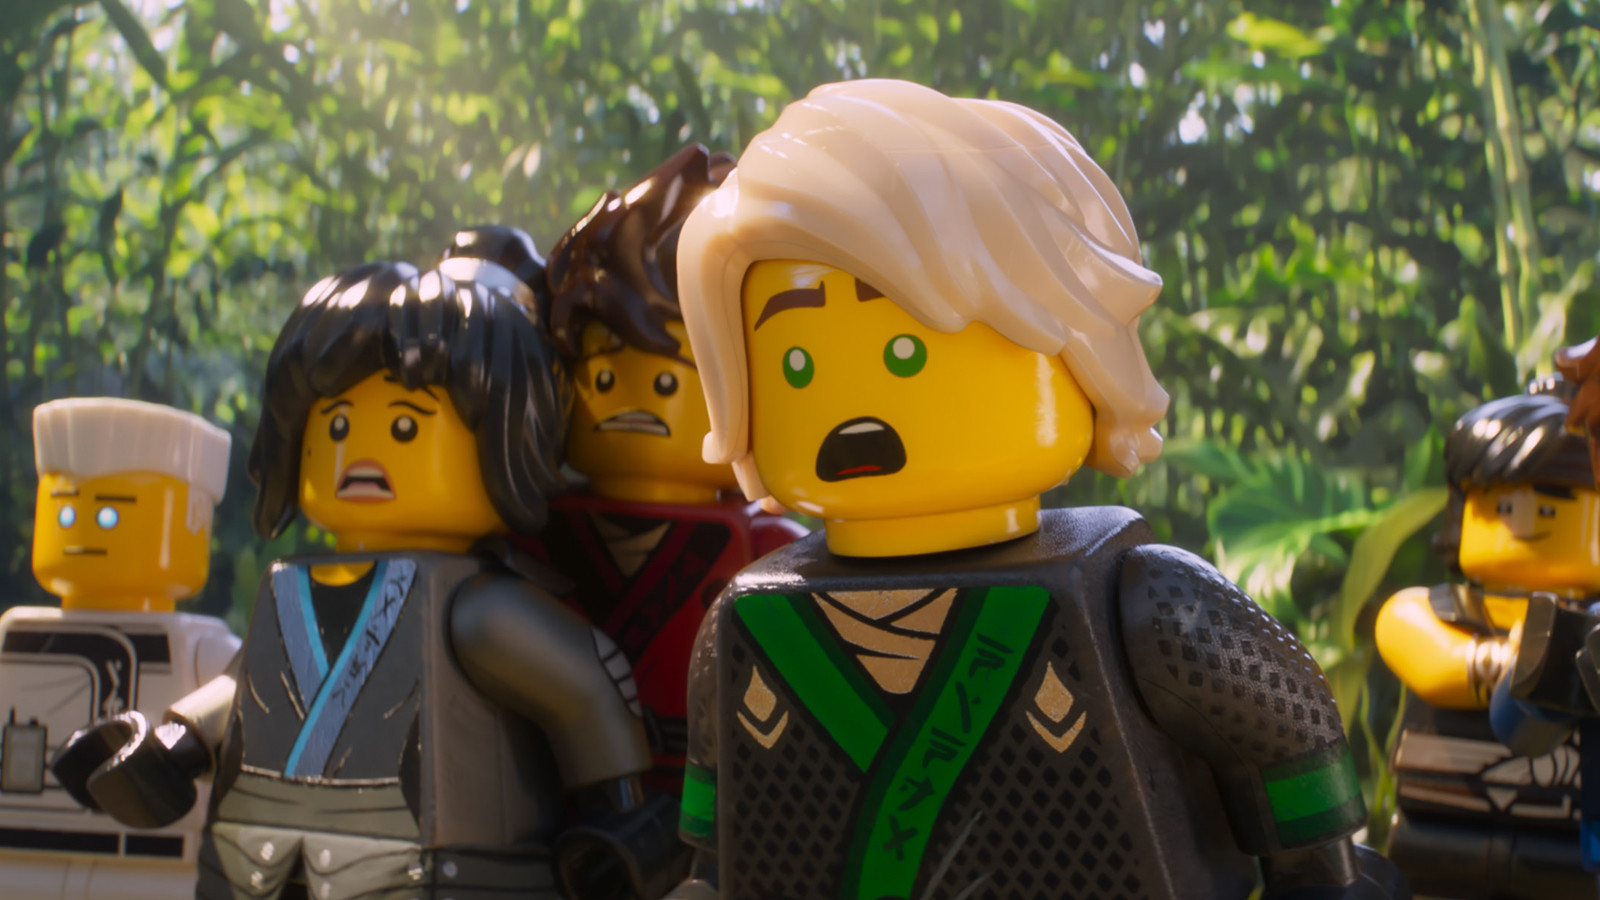 Where Can You Watch The Lego Ninjago Movie 'The Lego Ninjago Movie' is a few pieces short of the animated